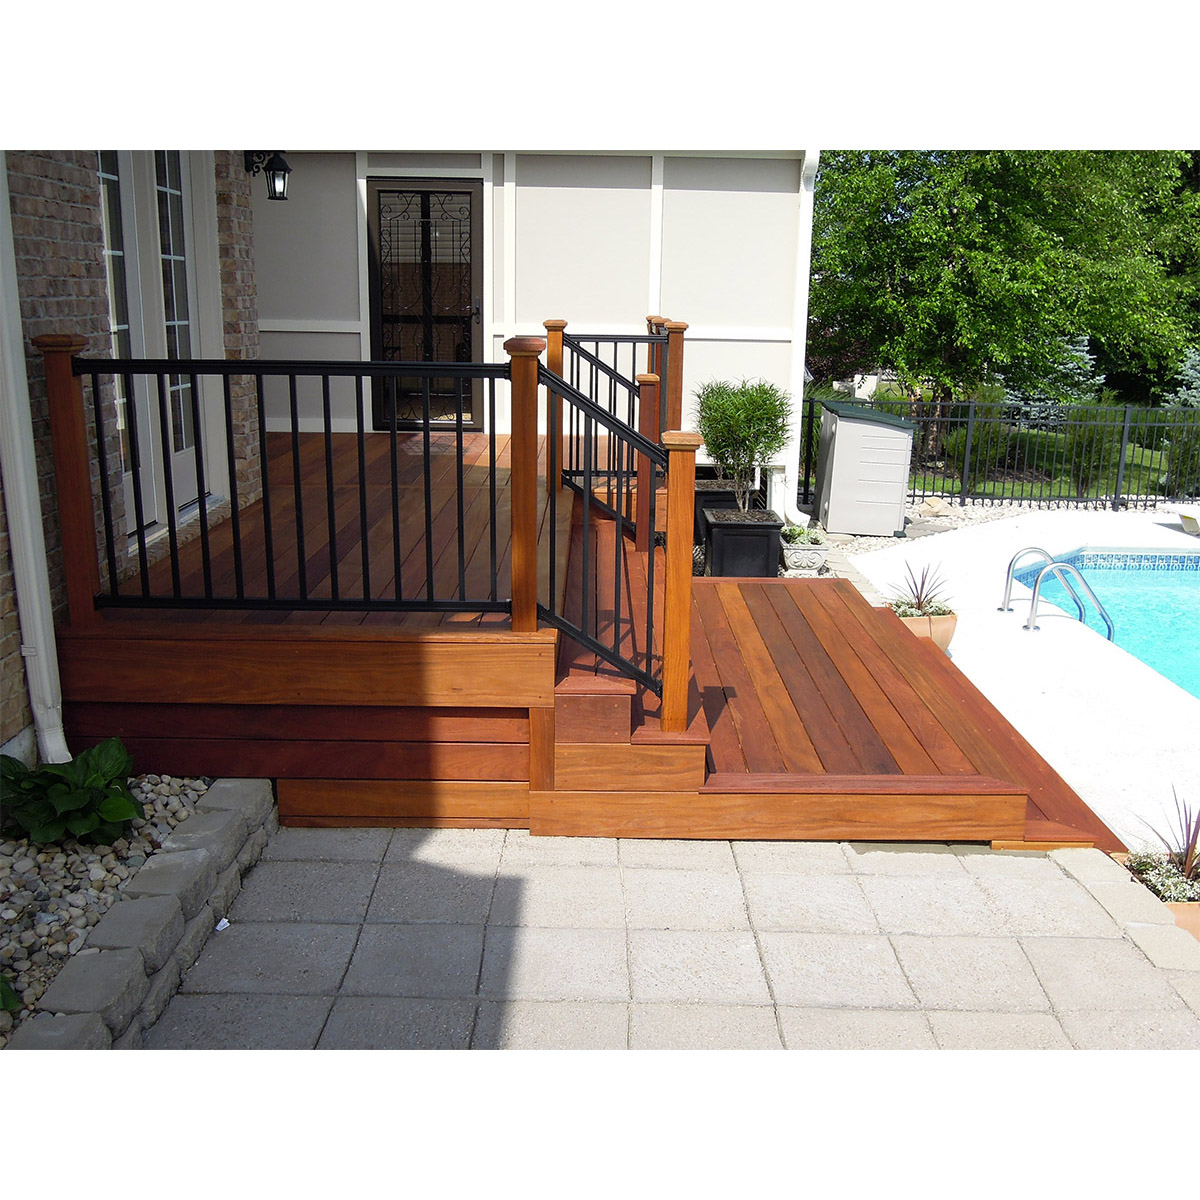 American Railing with Square Balusters